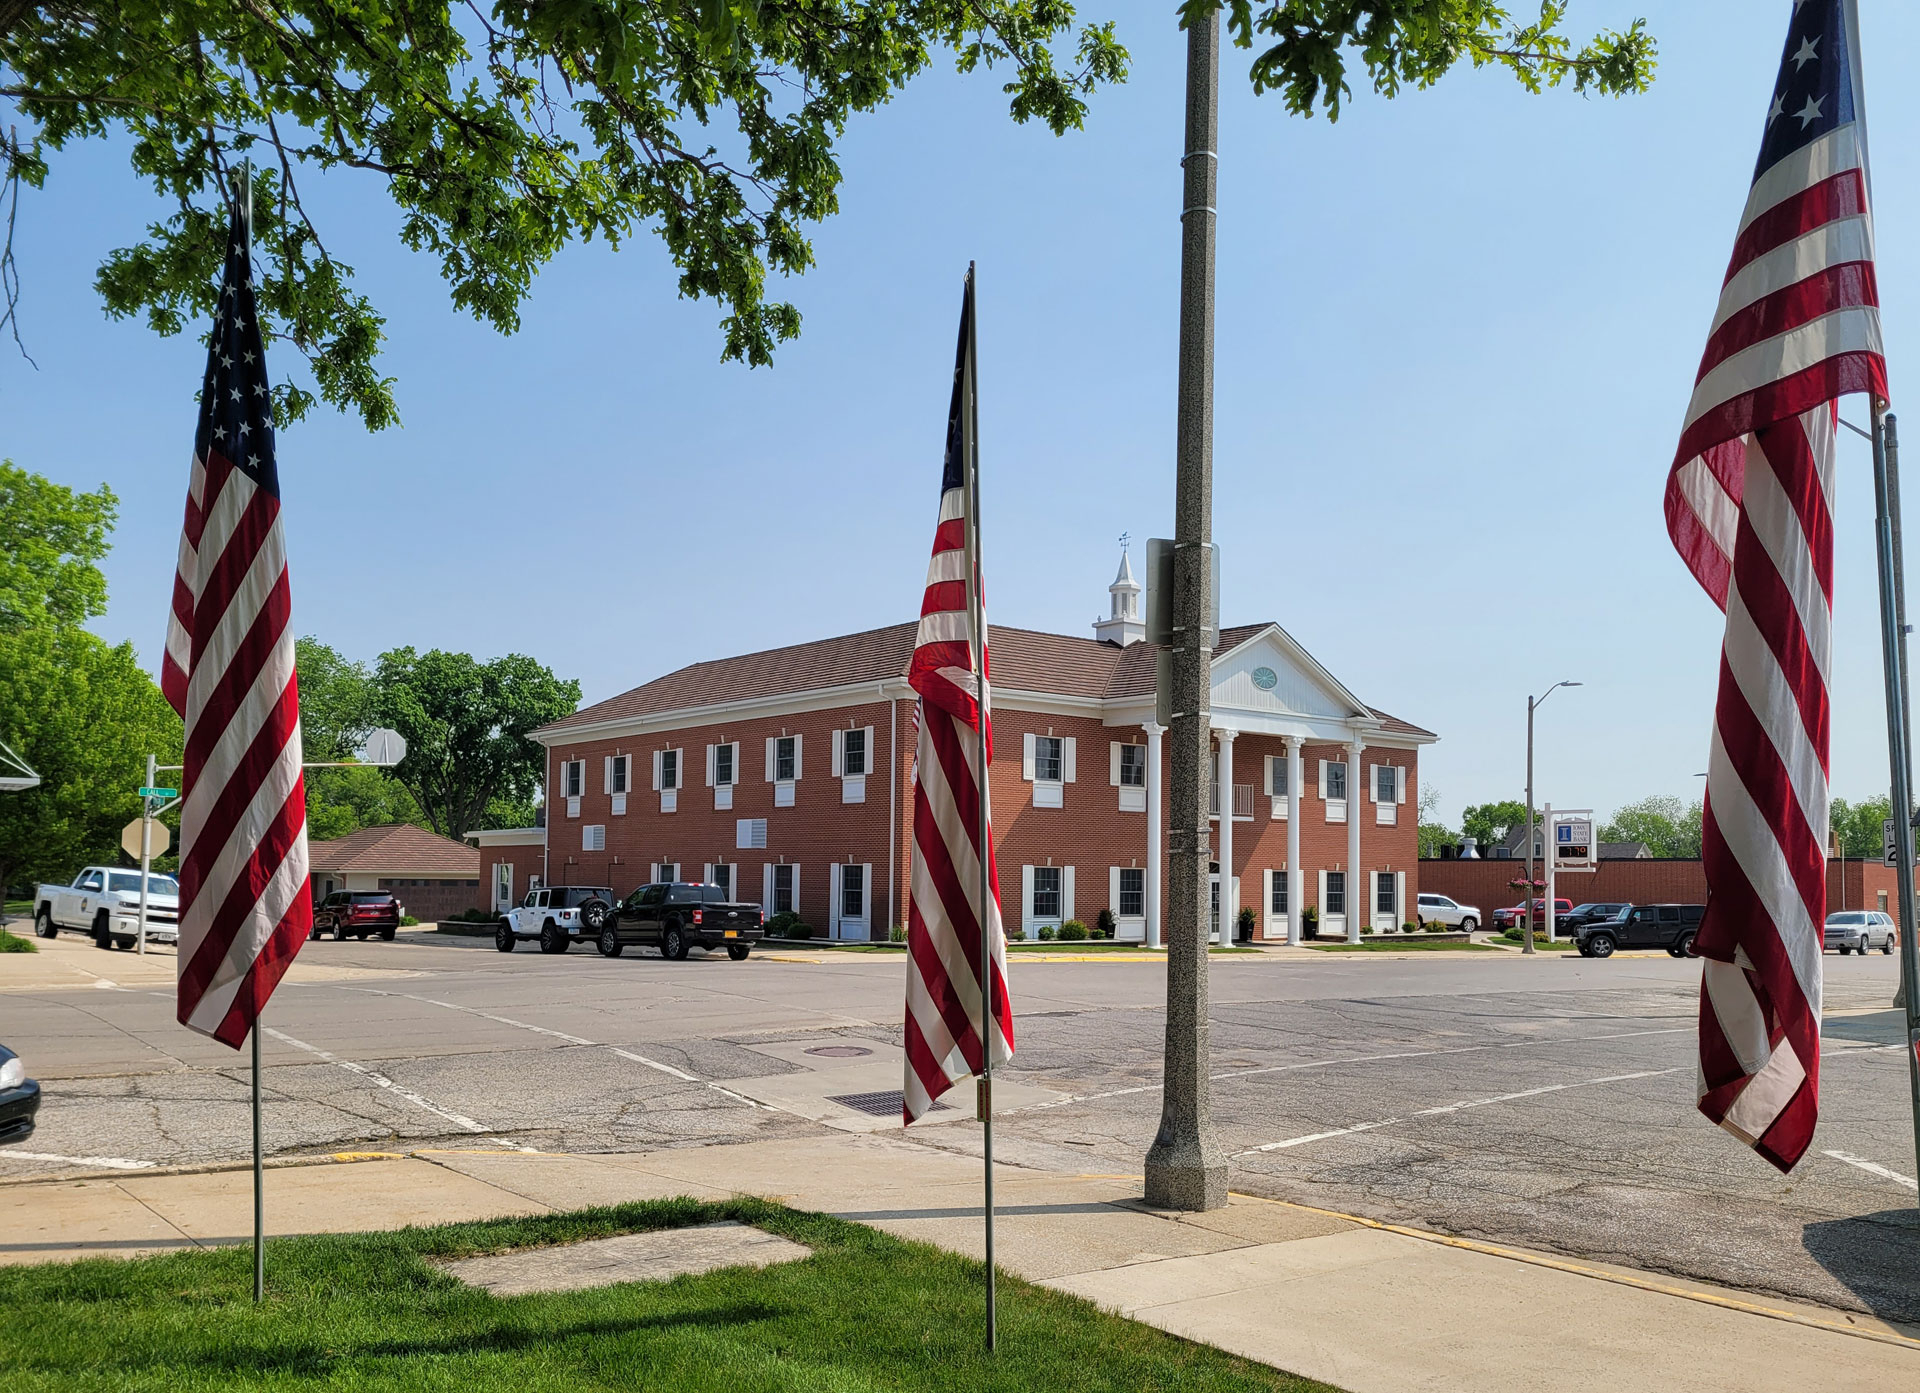 Summer Photo of Main Bank's Exterior with Flags